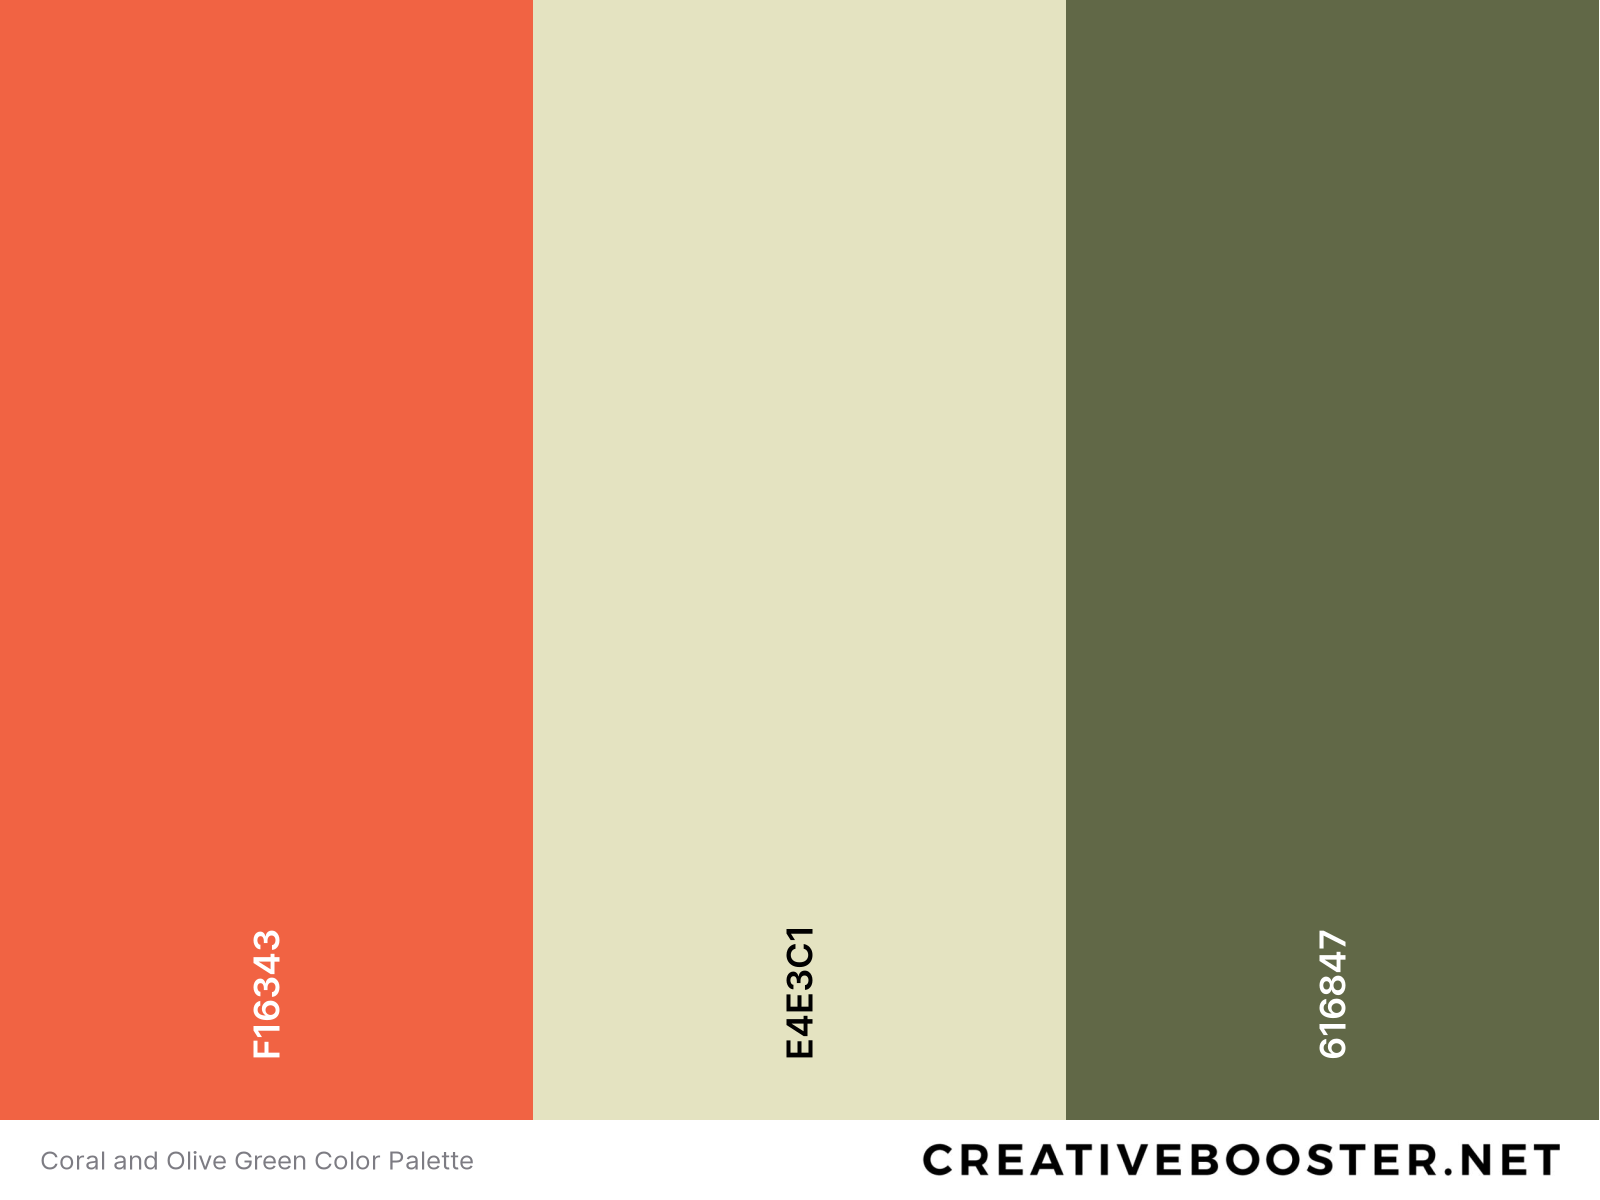 Coral and Olive Green Color Palette